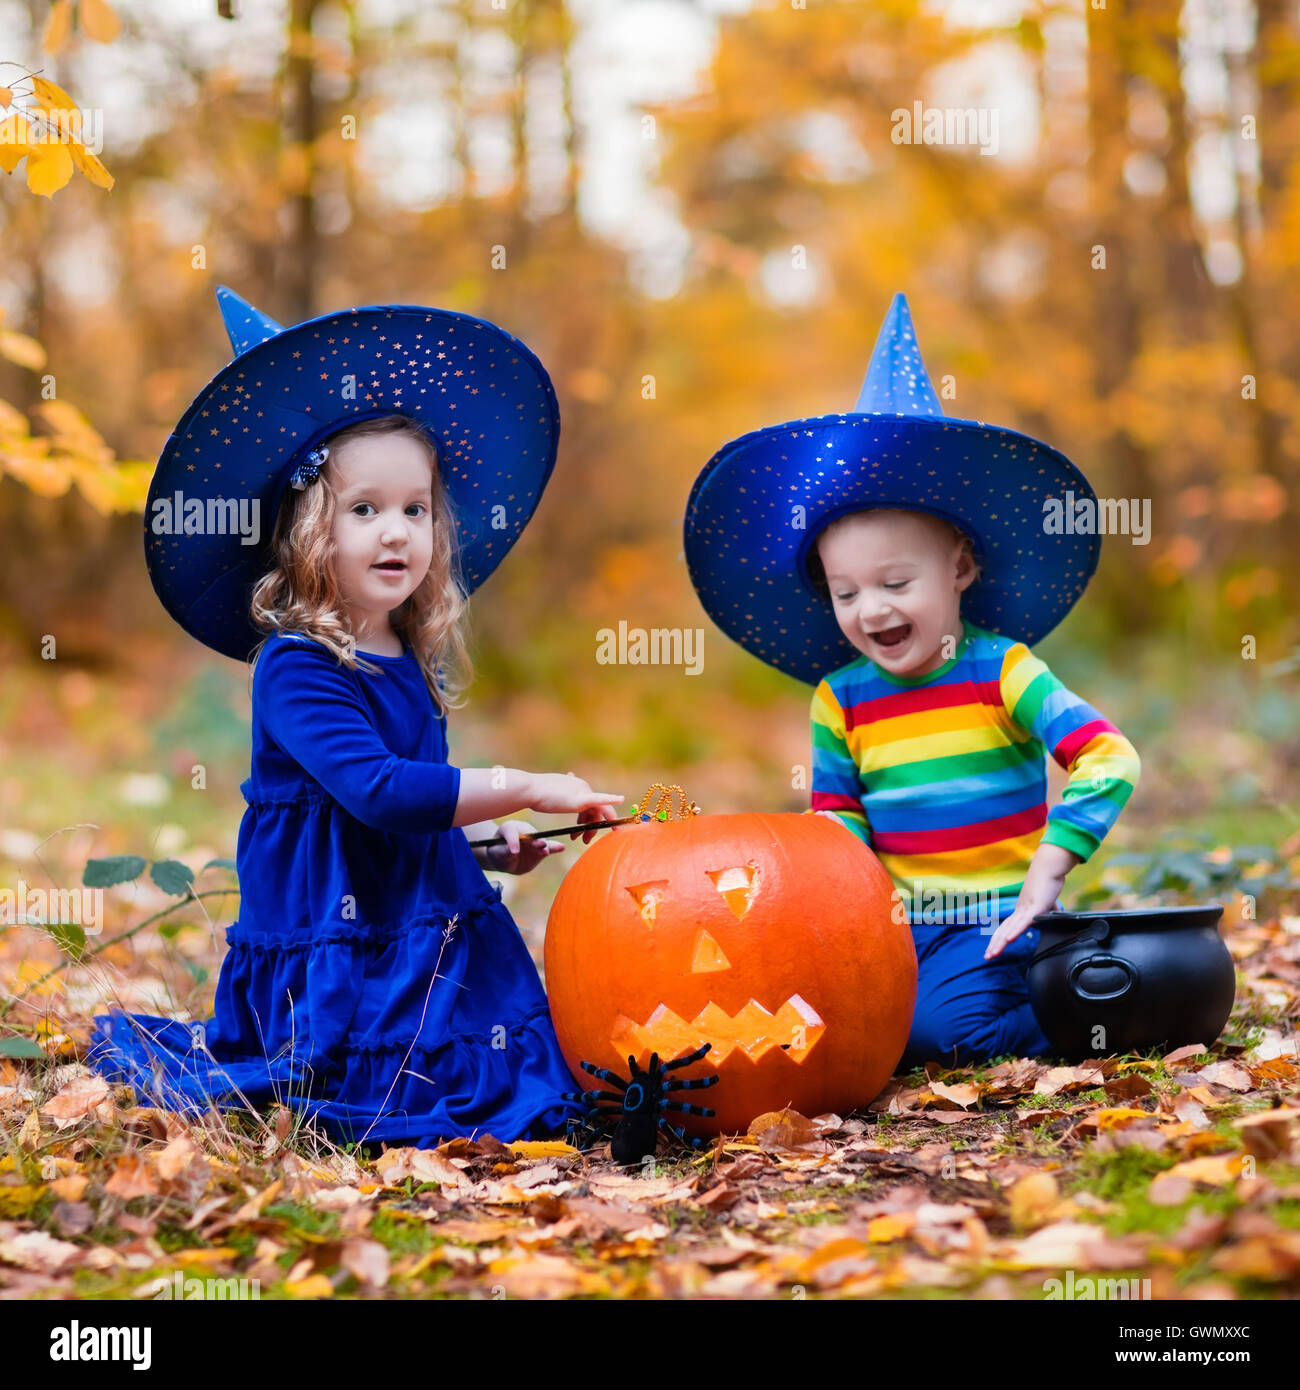 Children wearing blue witch costumes with hats playing with pumpkin and ...